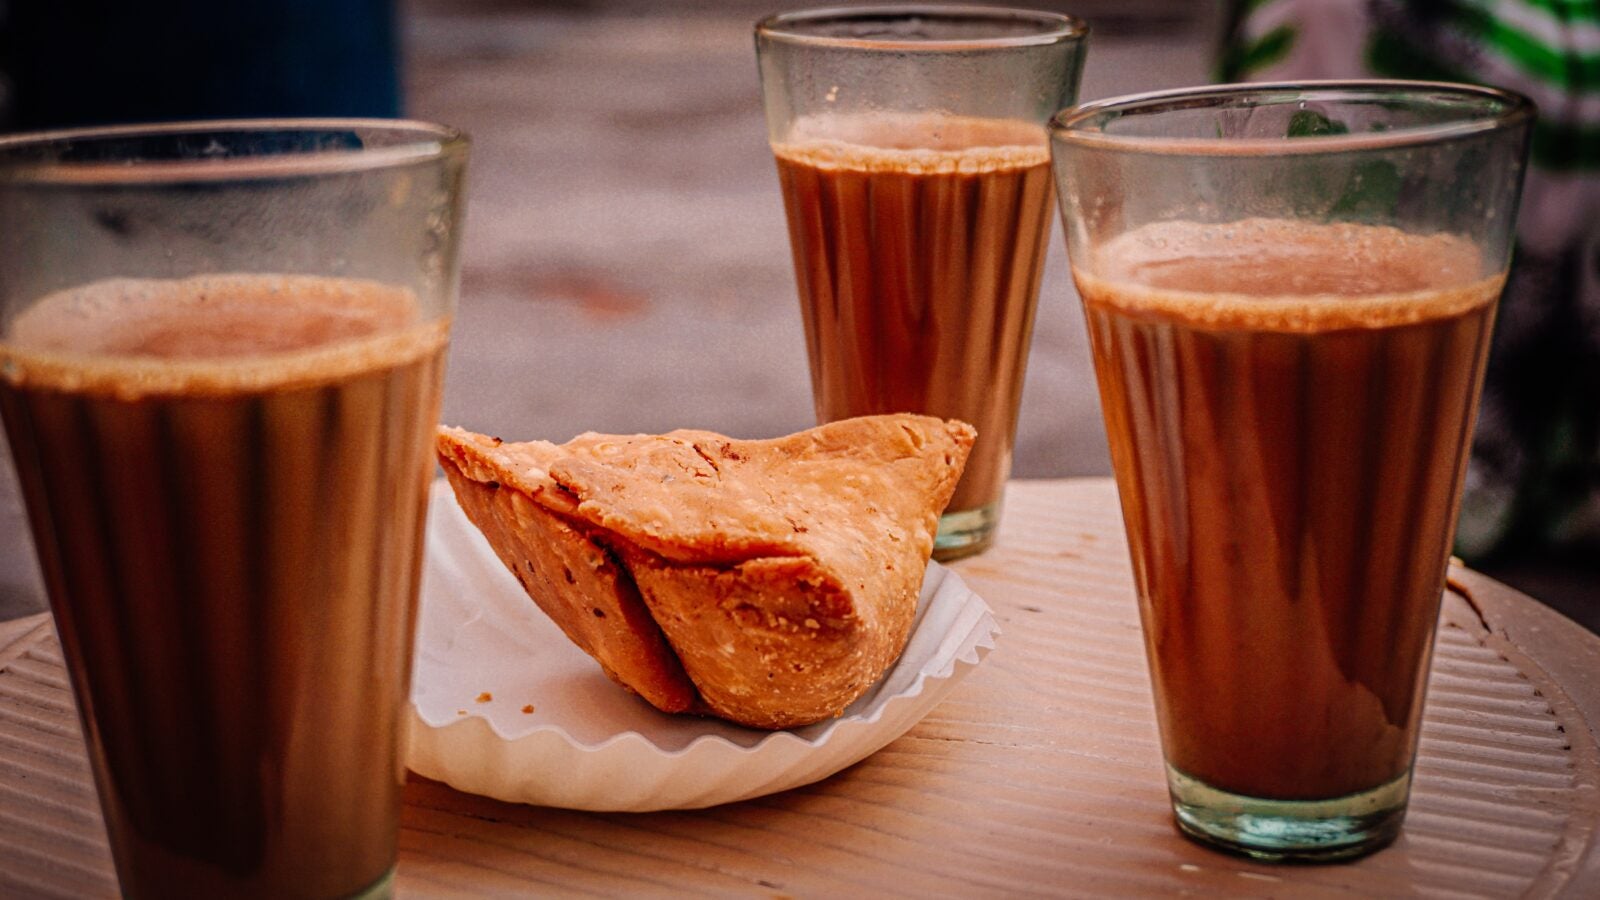 Image shows three full glasses of coffee around a single serving of currypuffs.